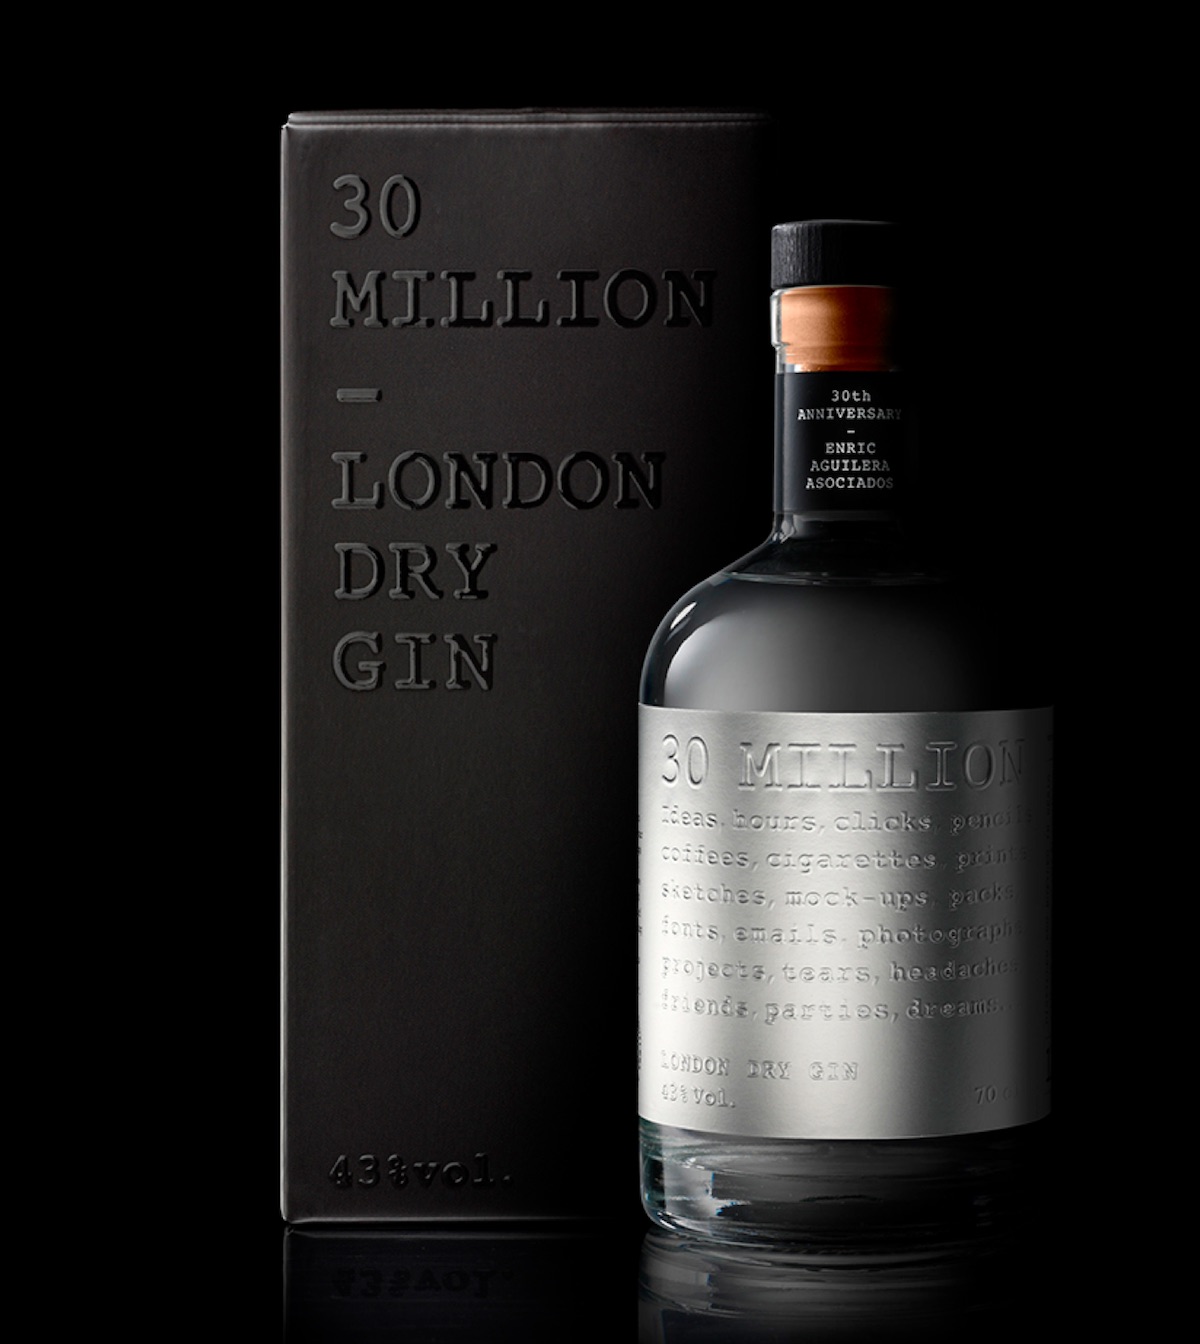 30 million gin packaging